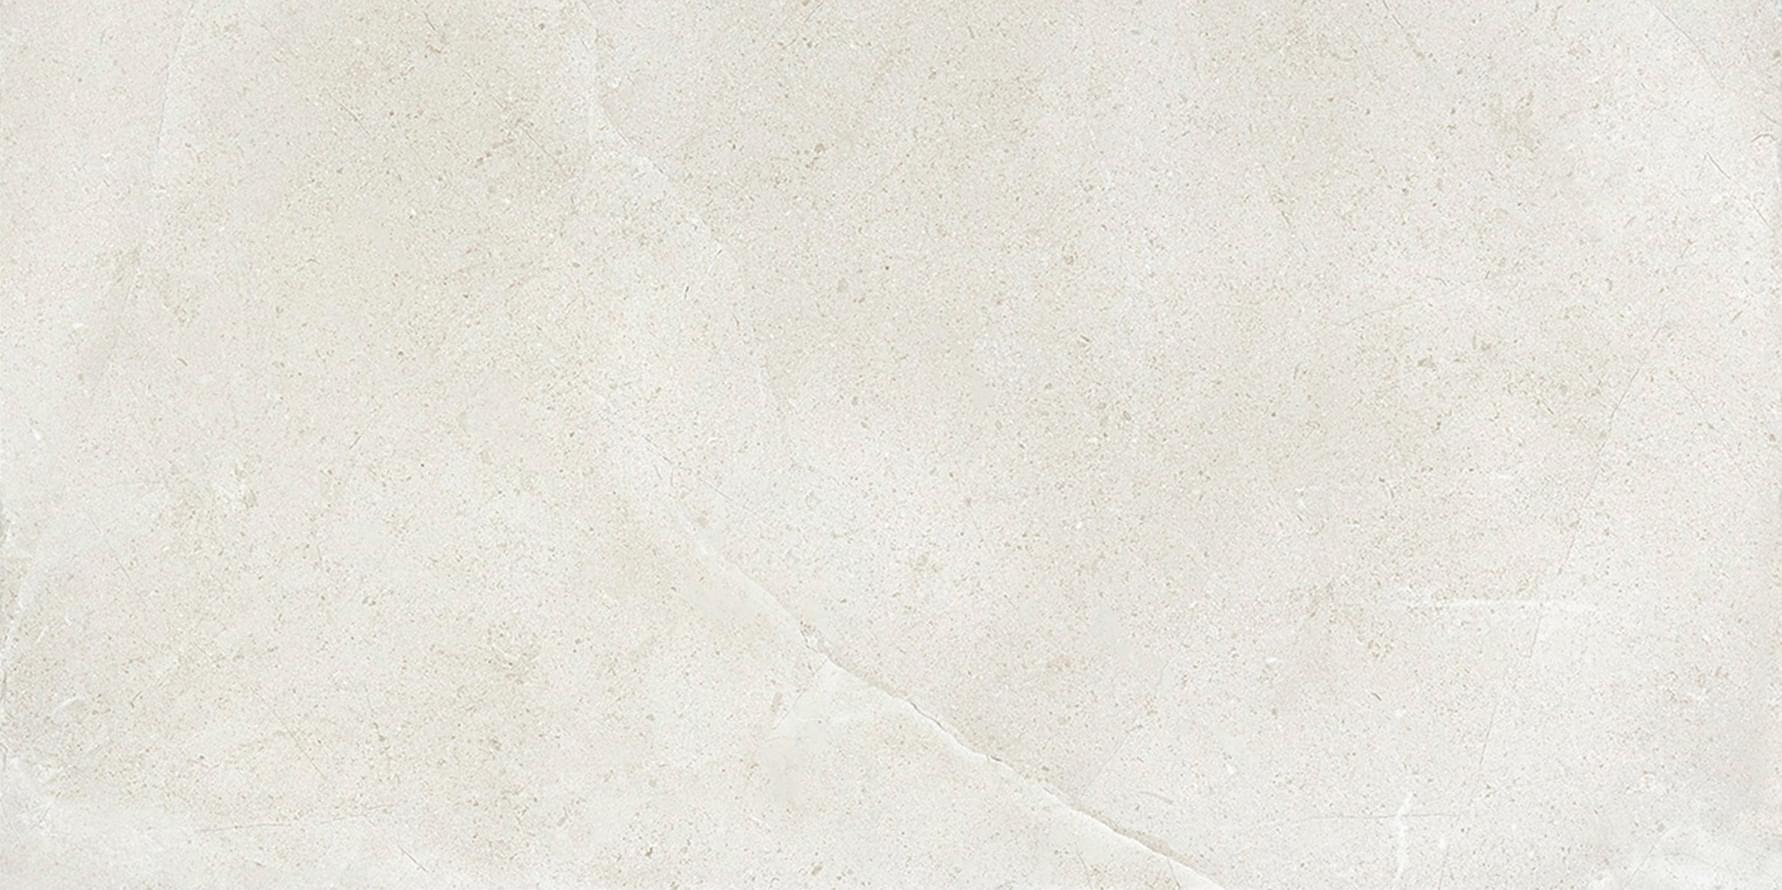 Magica Marstood Stone 01 Leccese Brushed Rectified 30x60